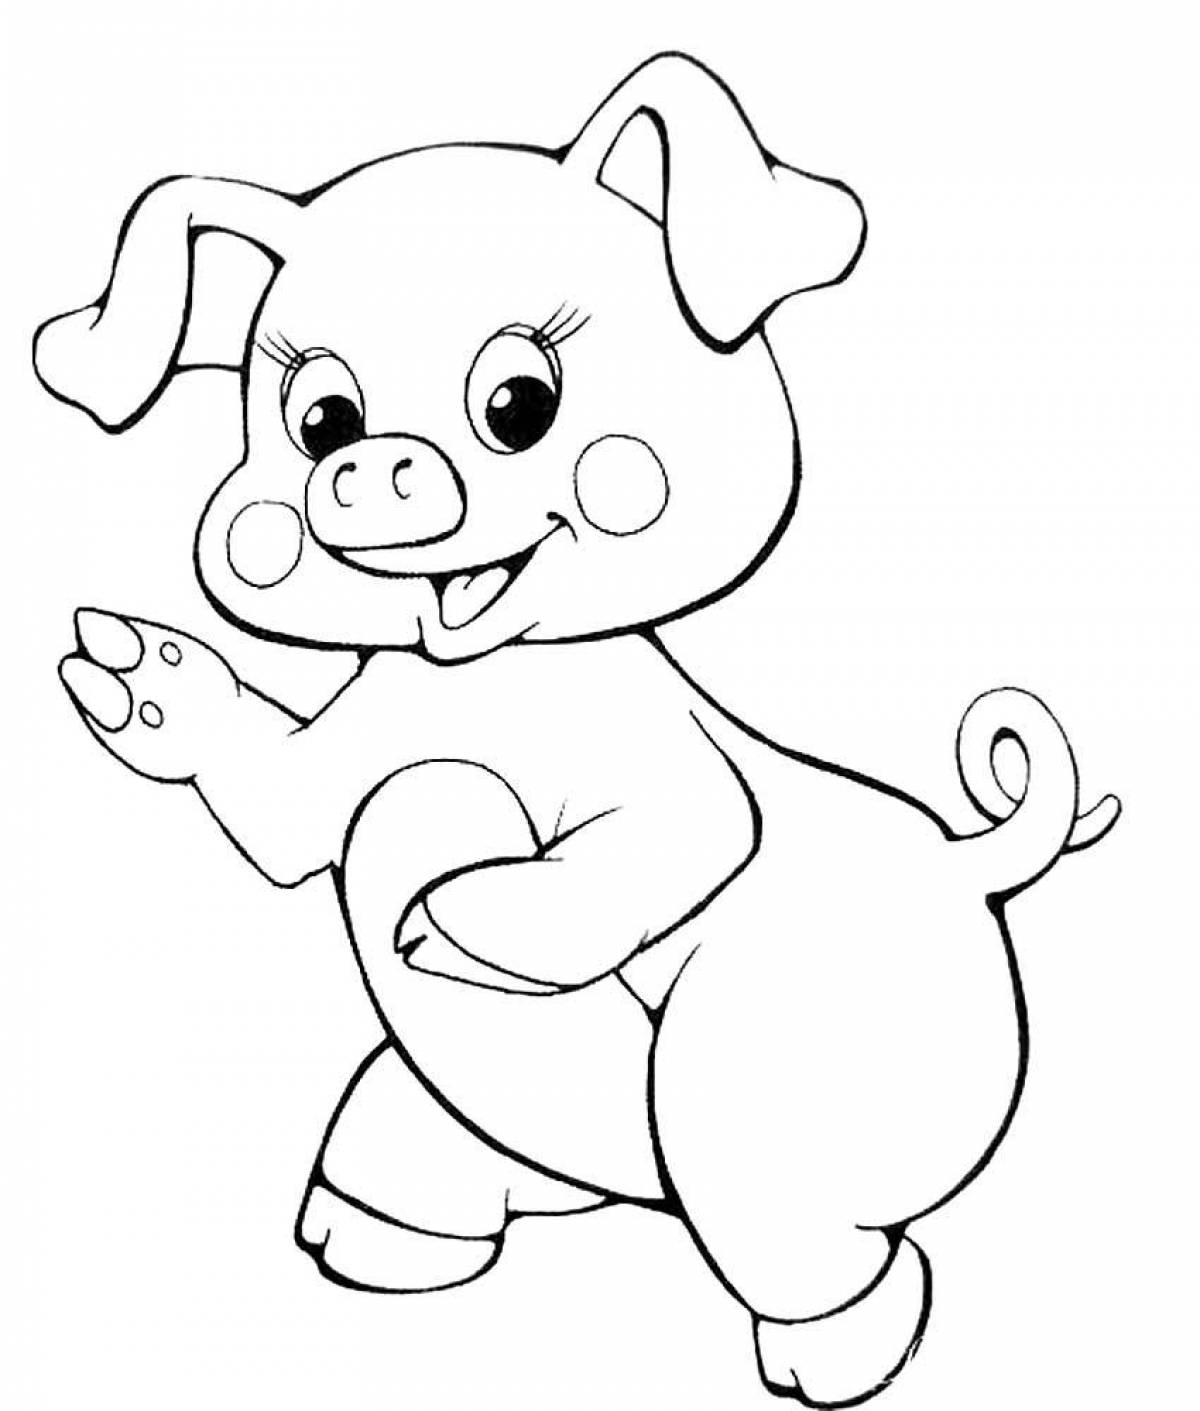 Coloring page witty pig